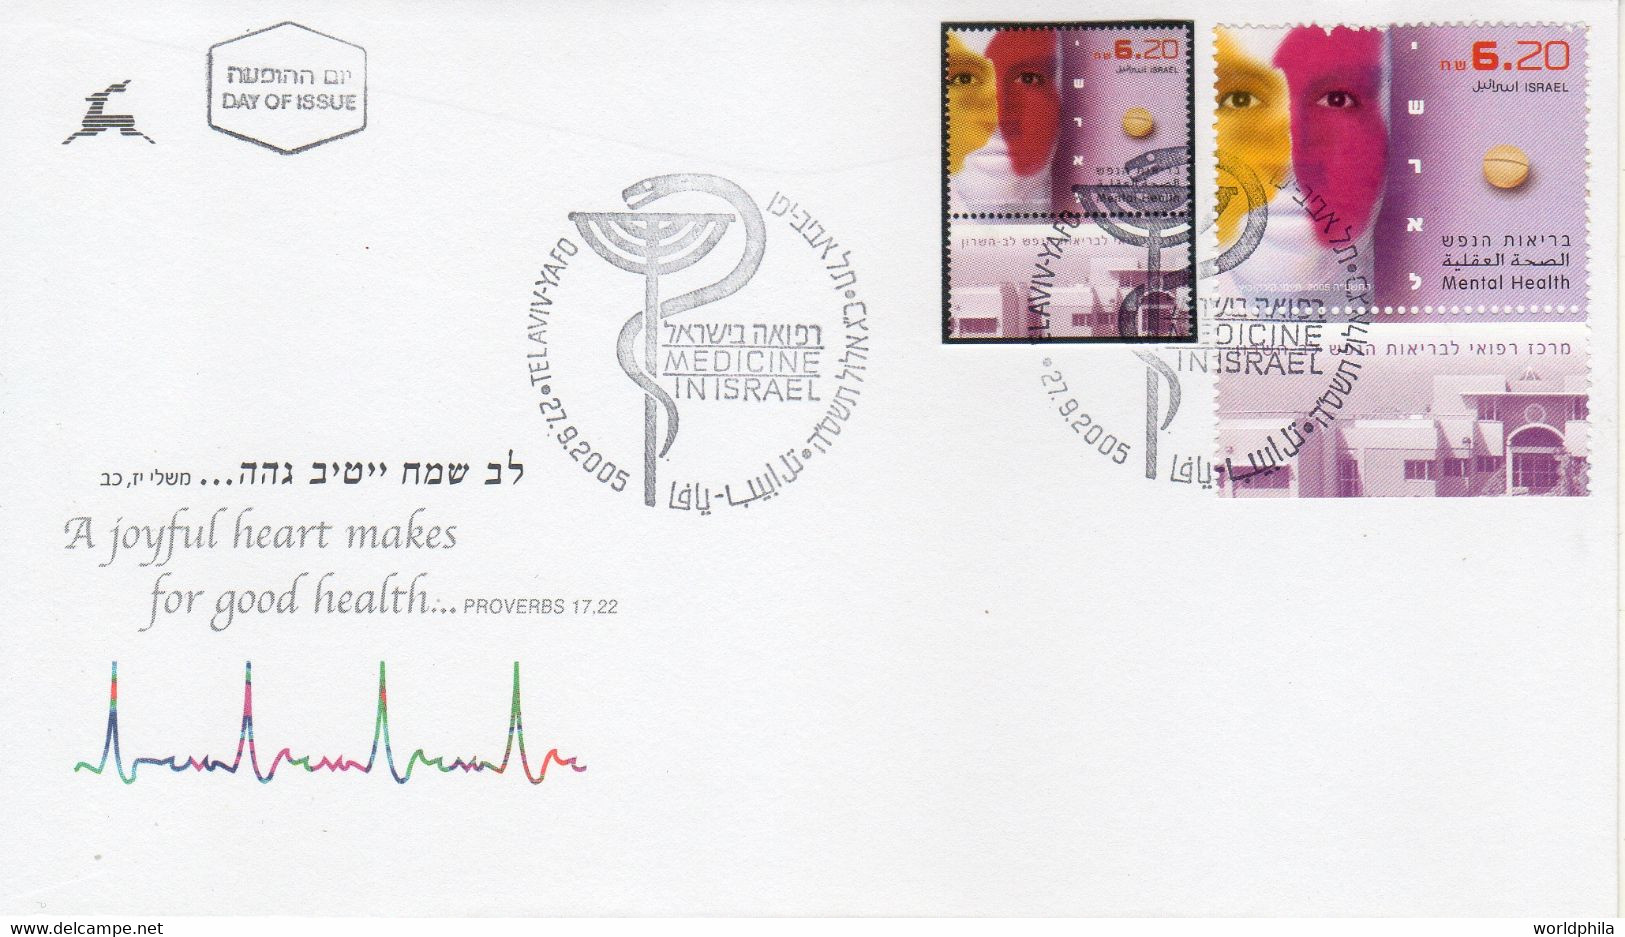 Israel 2005 Extremely Rare, Medicine In Israel, Mental Health, Designer Photo Proof, Essay+regular FDC 25 - Imperforates, Proofs & Errors